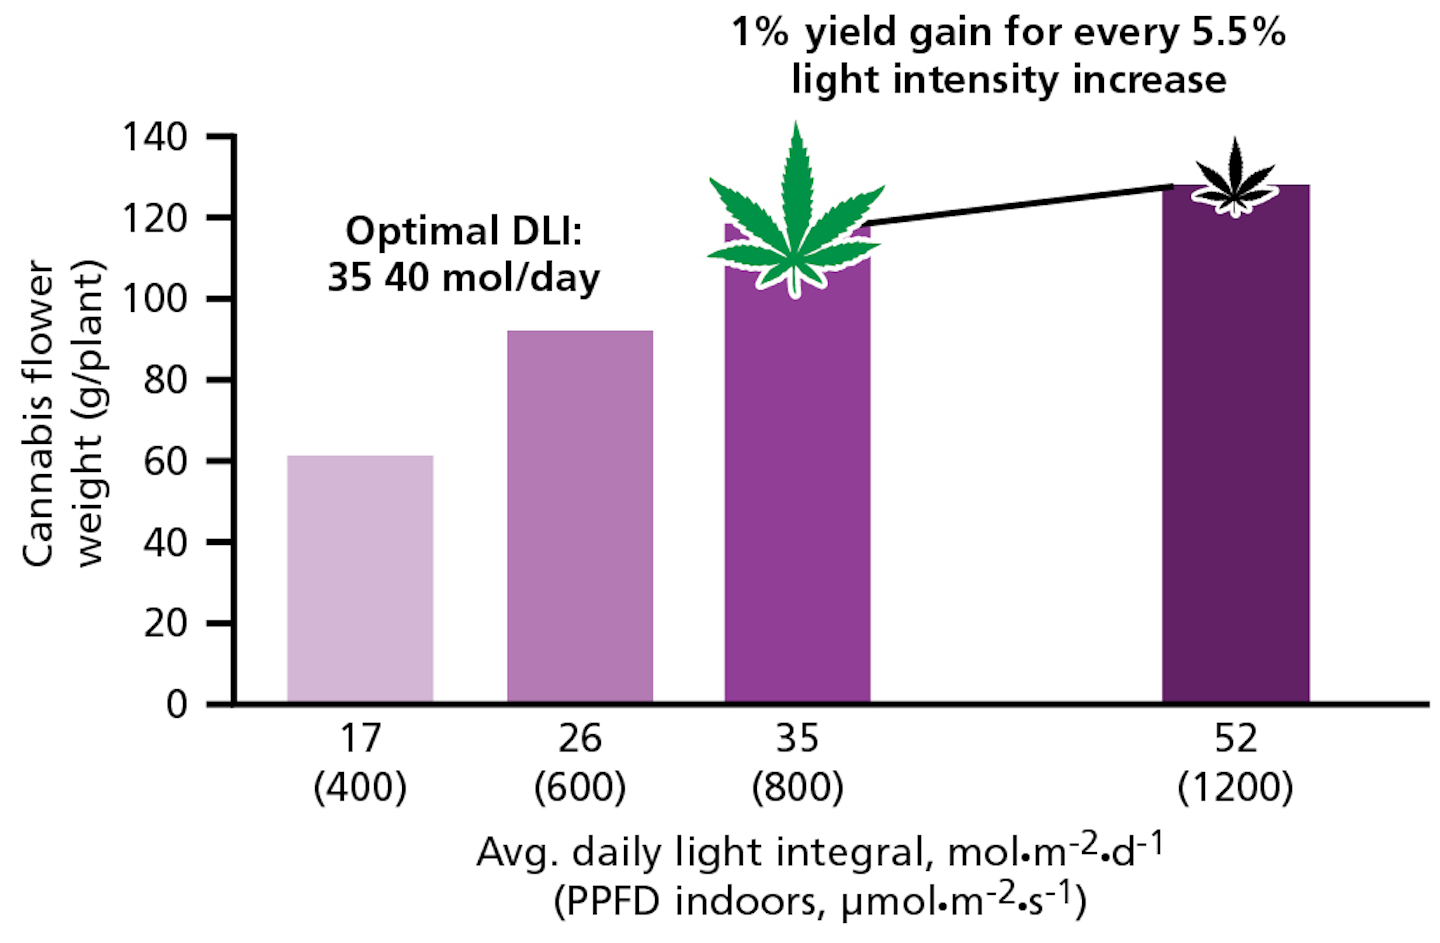 FIG. 2. Cannabis flower weight increase (g/plant) is correlated to increases in light intensity, but tends to stabilize between 35 and 52 mol·m-2·d-1. This data can help growers determine how best to utilize supplemental lighting. (Data used with permission from Allison Justice Study; OutCo, The Hemp Mine.)